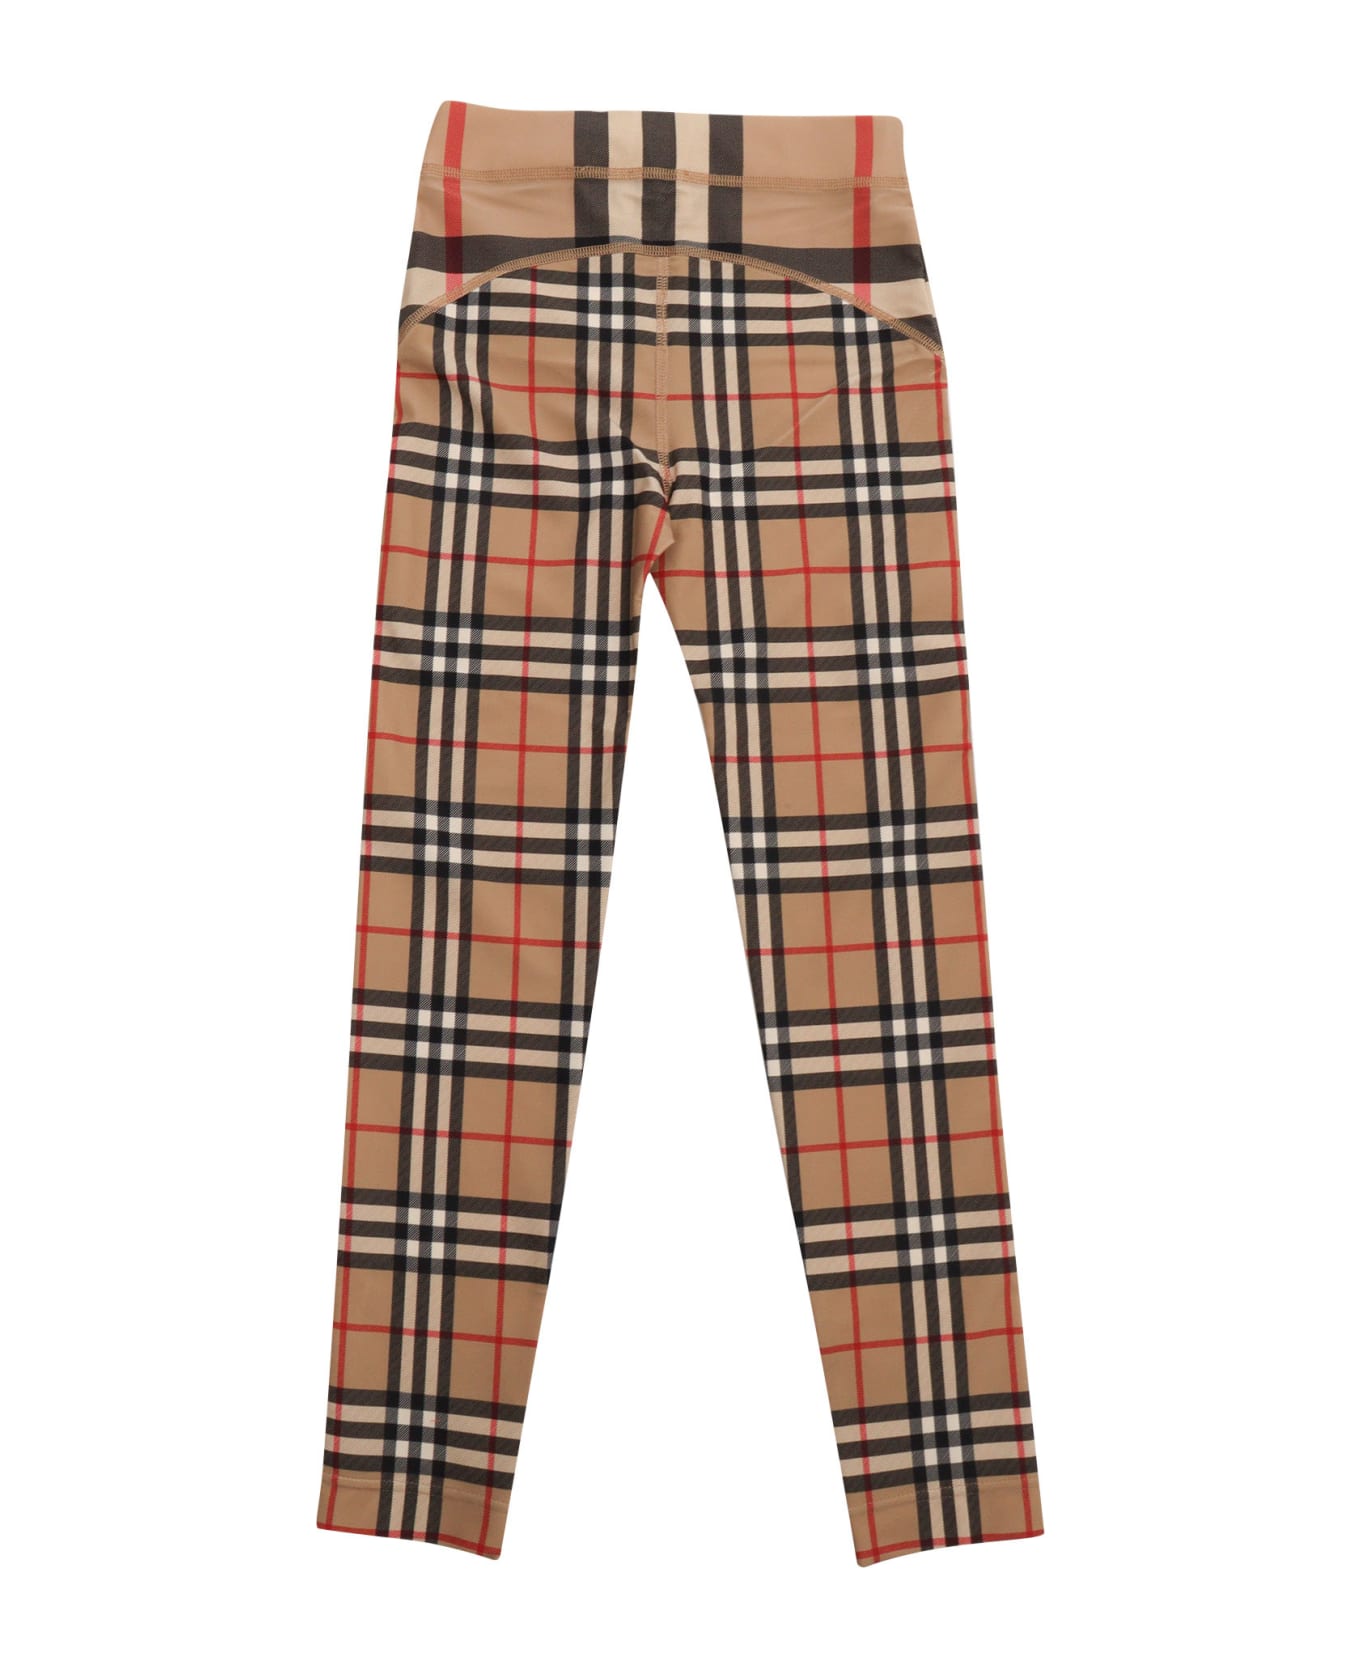 Burberry Trousers - BEIGE